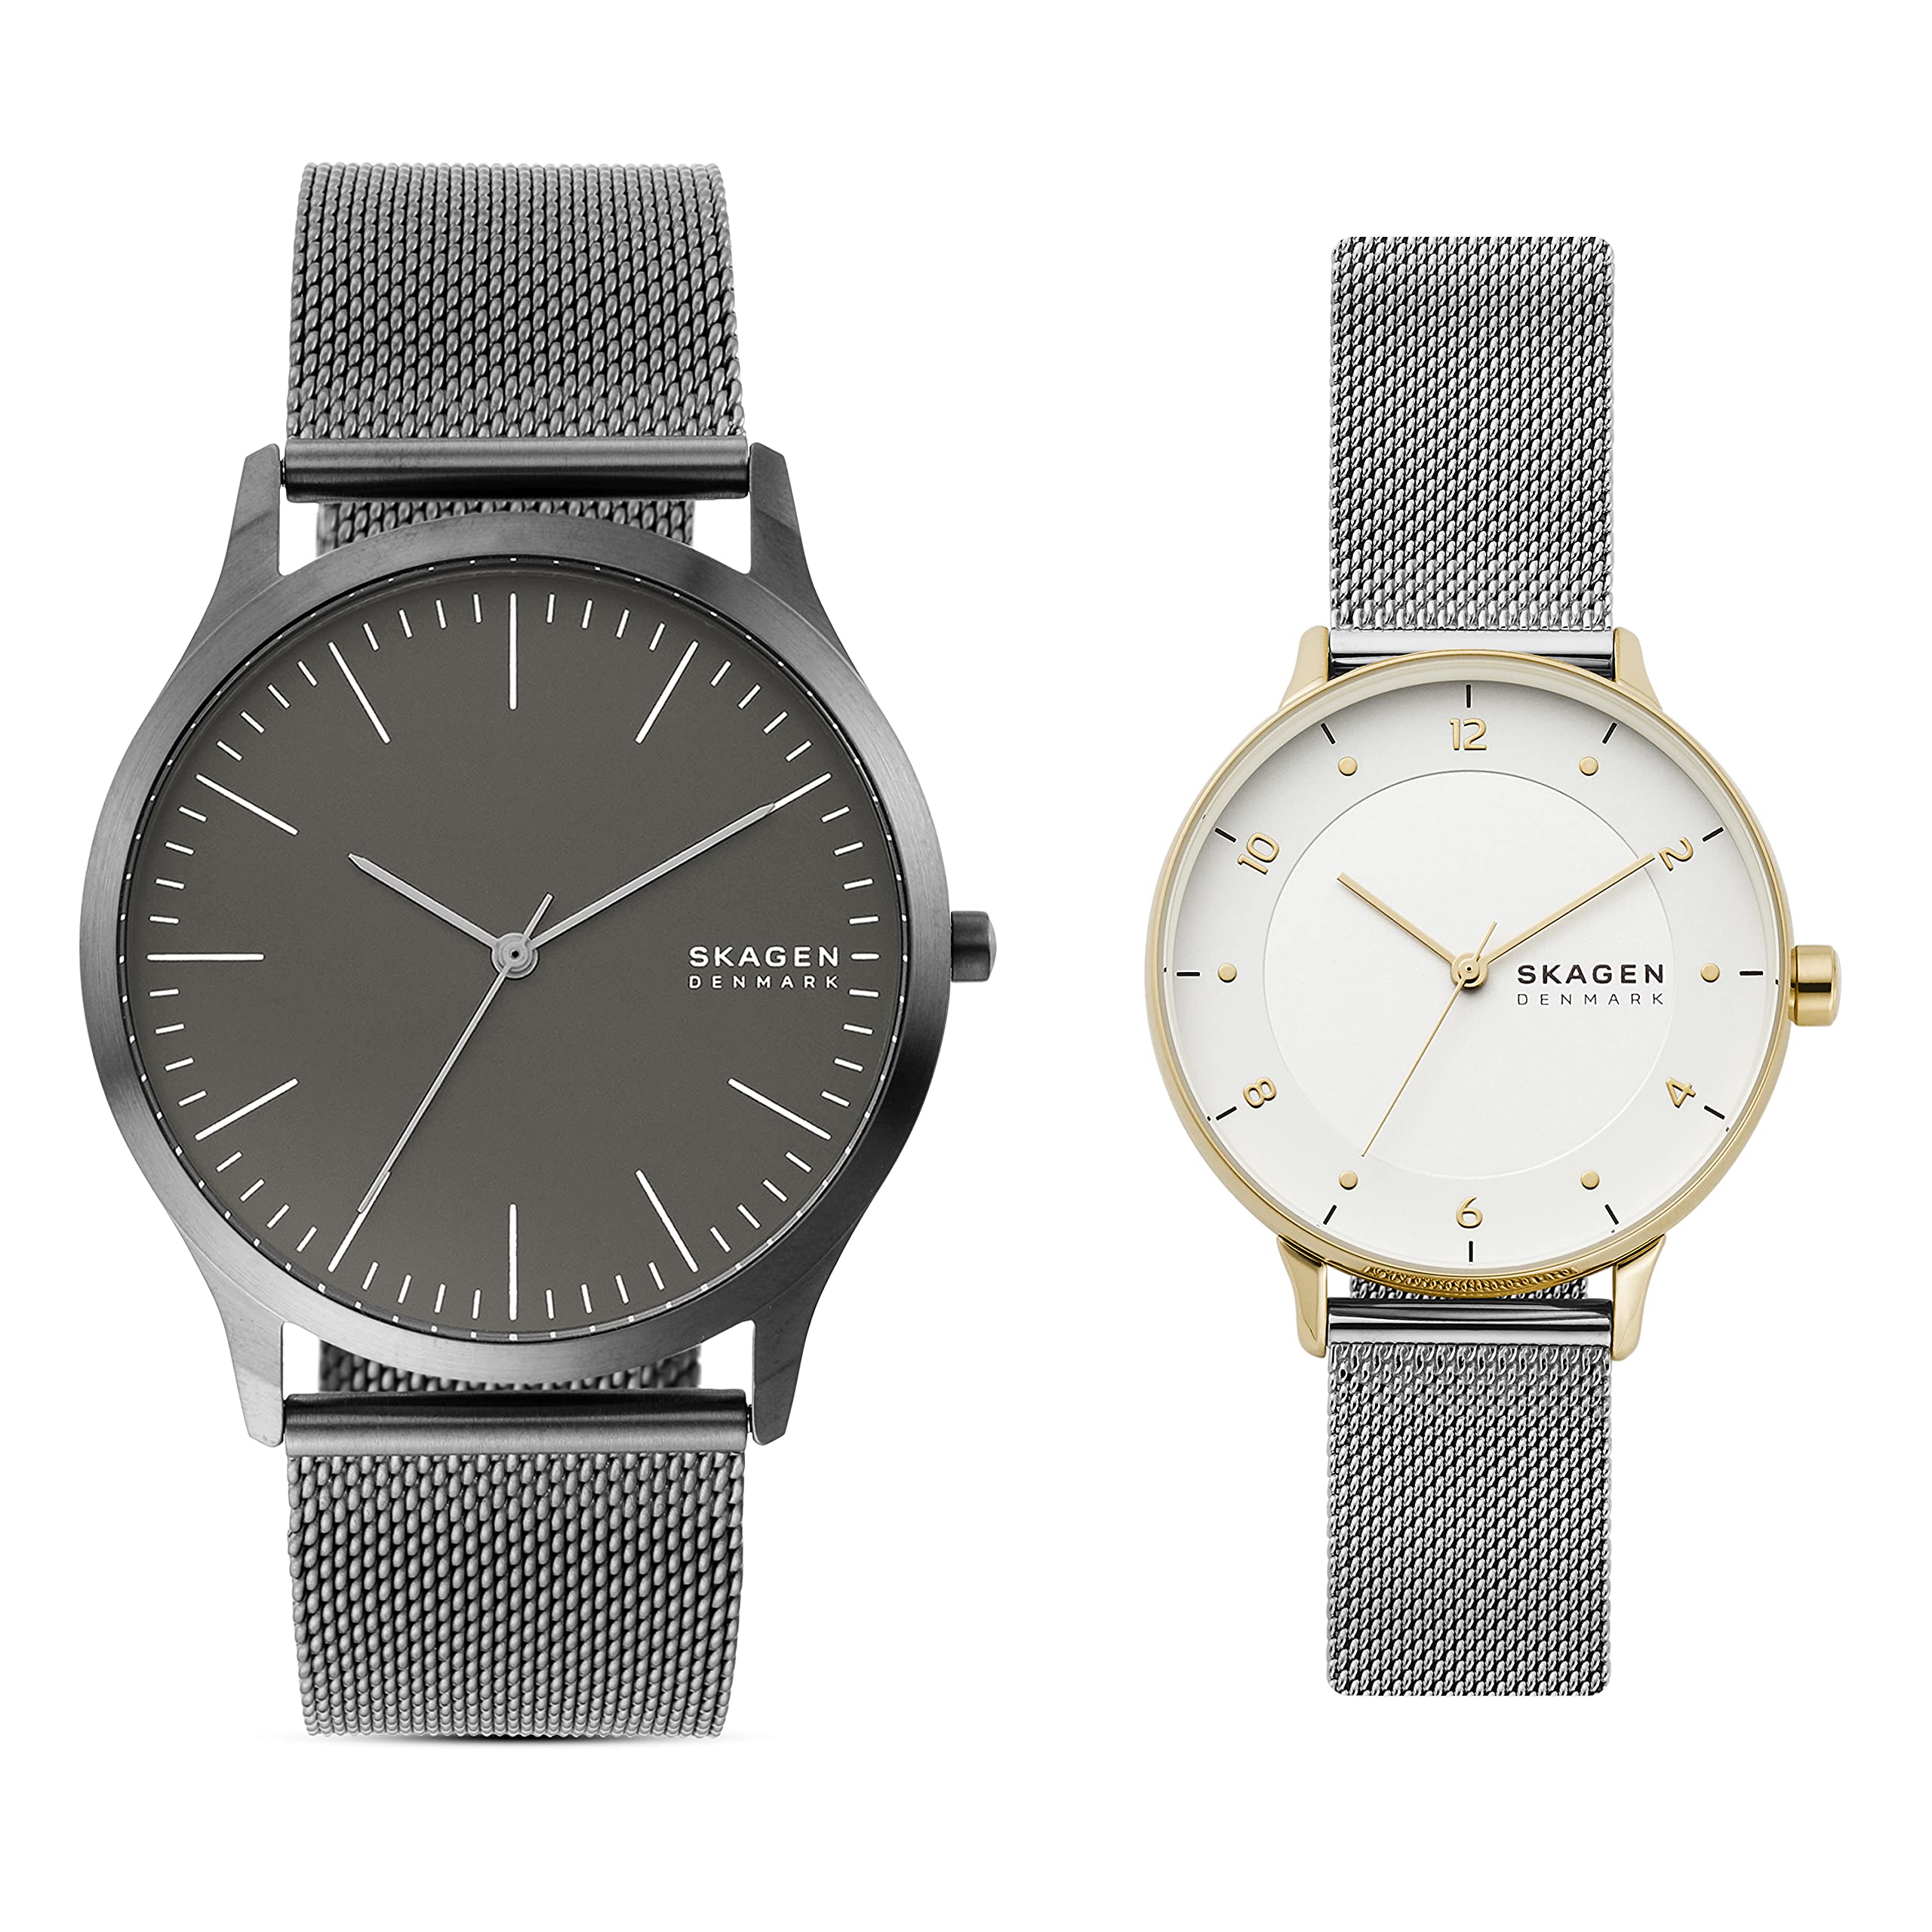 Skagen Men's Jorn Quartz Analog Stainless Steel and Stainless Steel Mesh Watch, Color: Grey with Women's RIIS Quartz Analog Stainless Steel and Stainless Steel Watch, Color: Silver